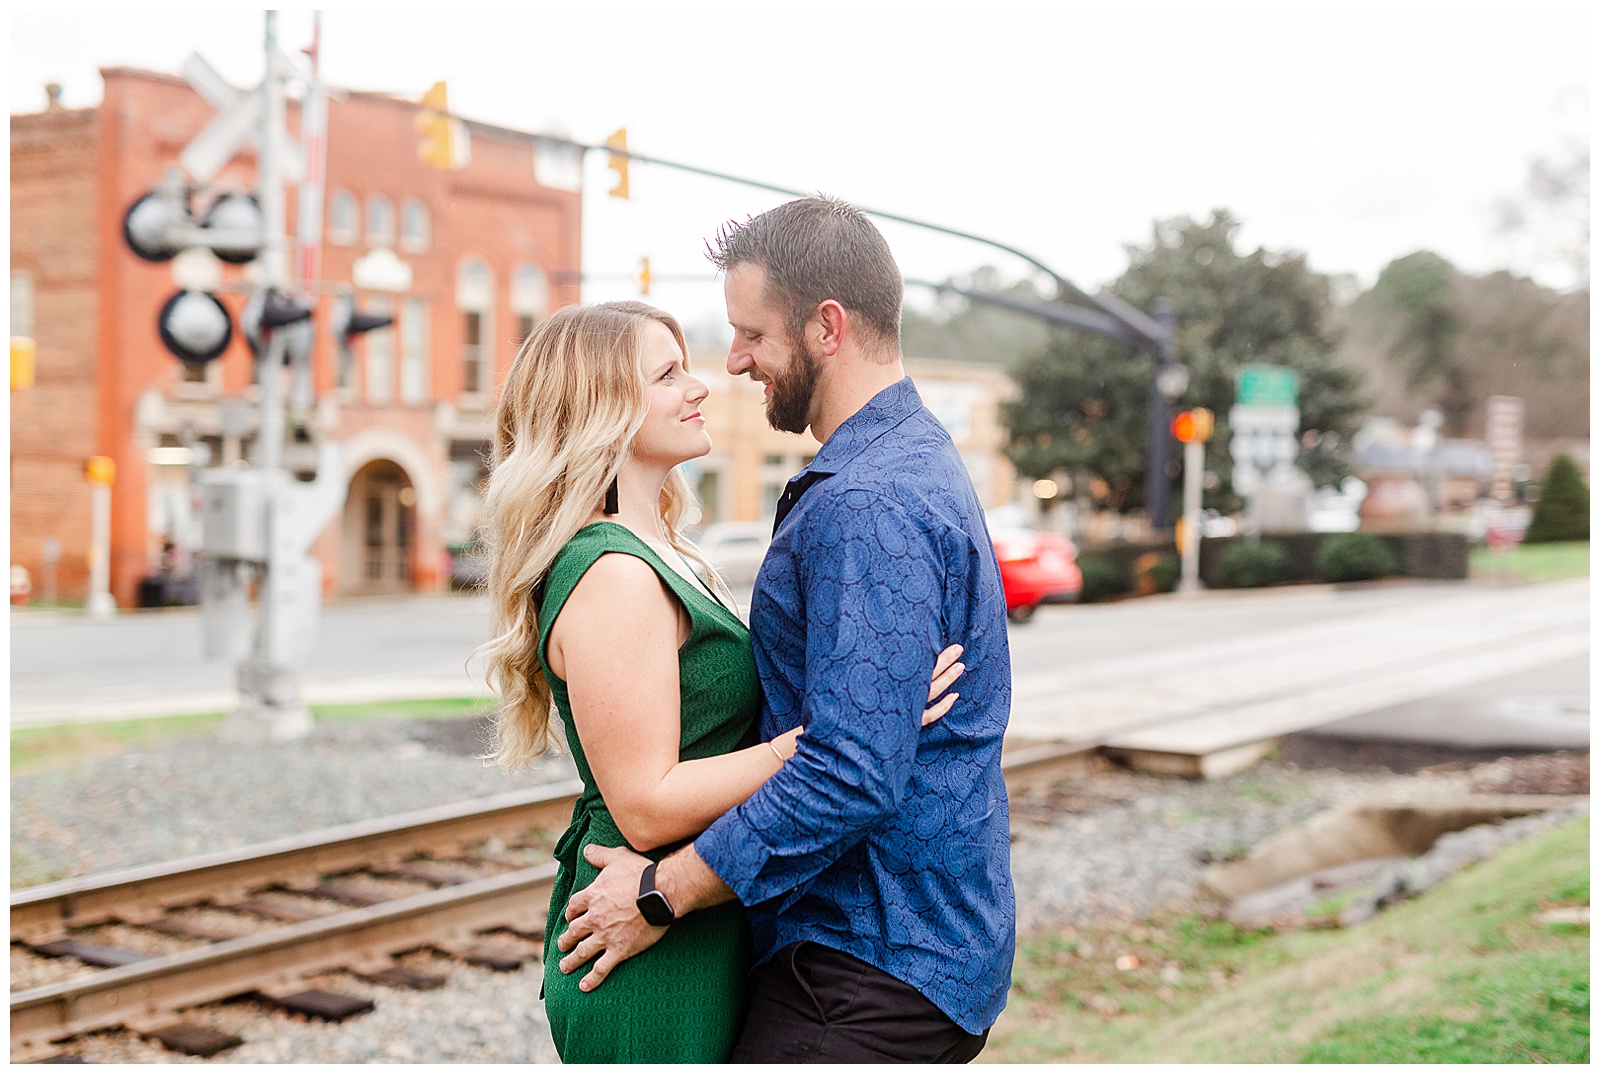 Adorable couple near old train tracks in downtown Waxhaw, NC Engagement Session with Green Dress Outfit Ideas